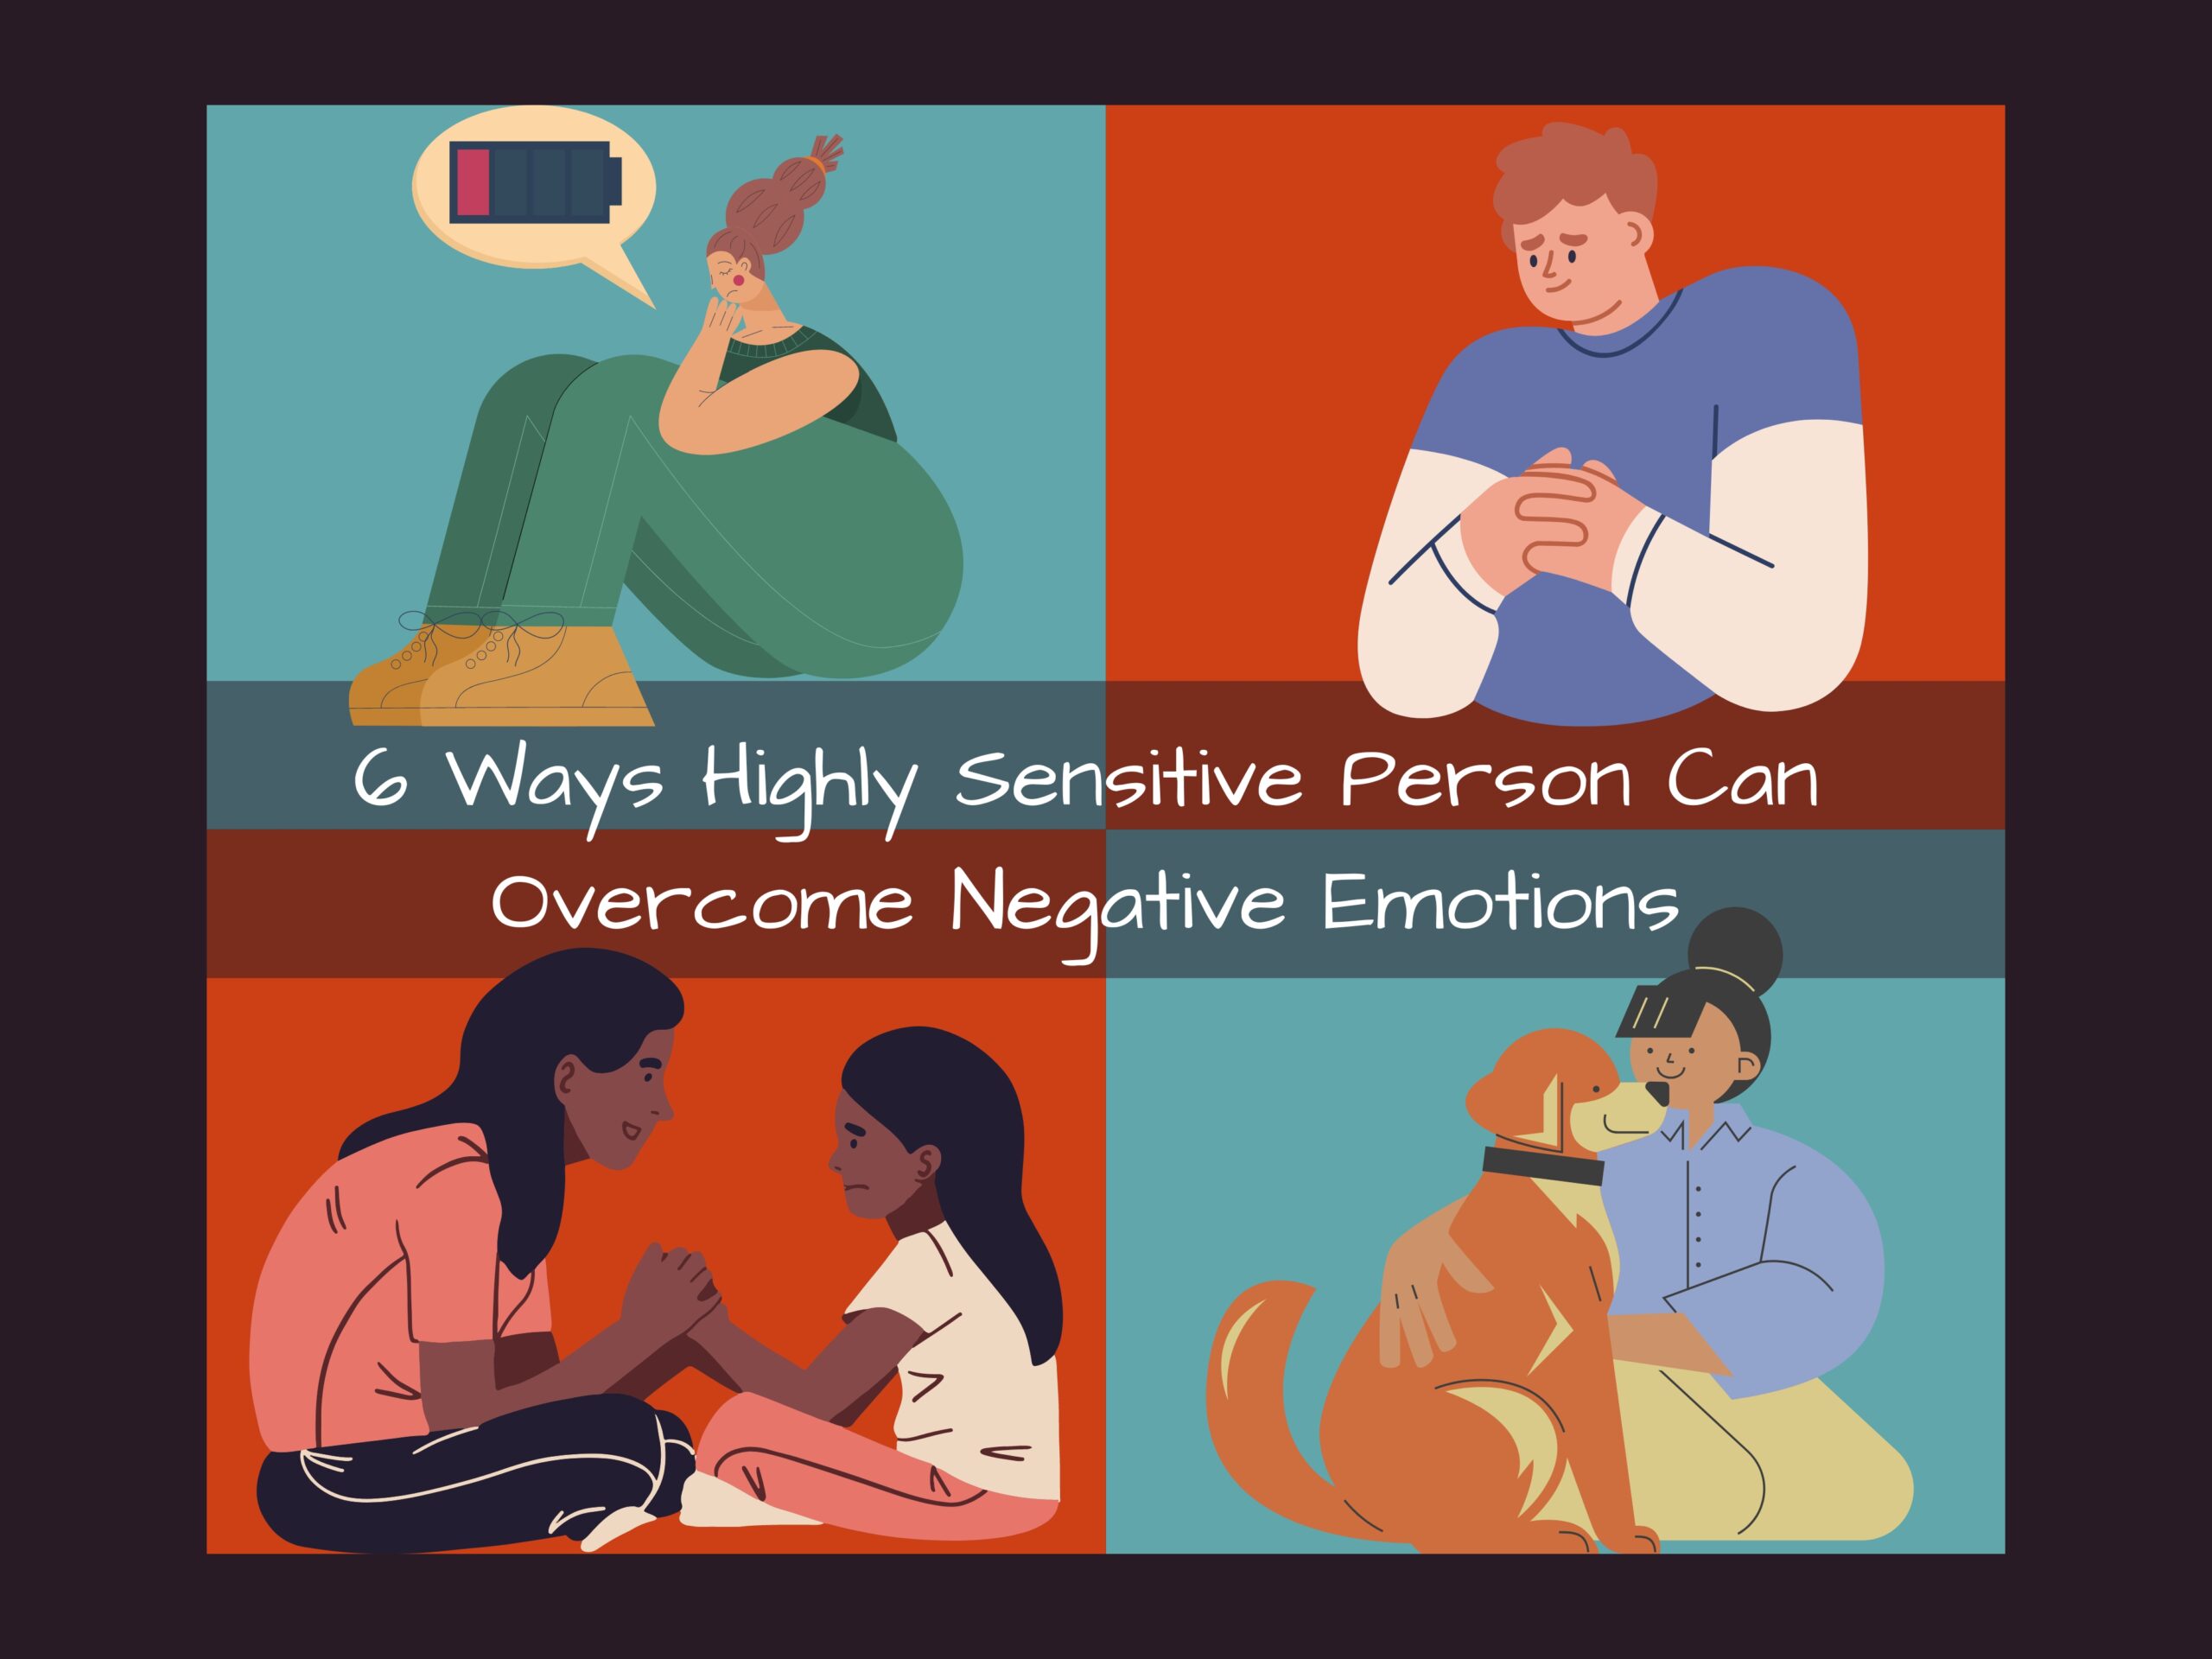 6 Ways Highly Sensitive Person Can Overcome Negative Emotions